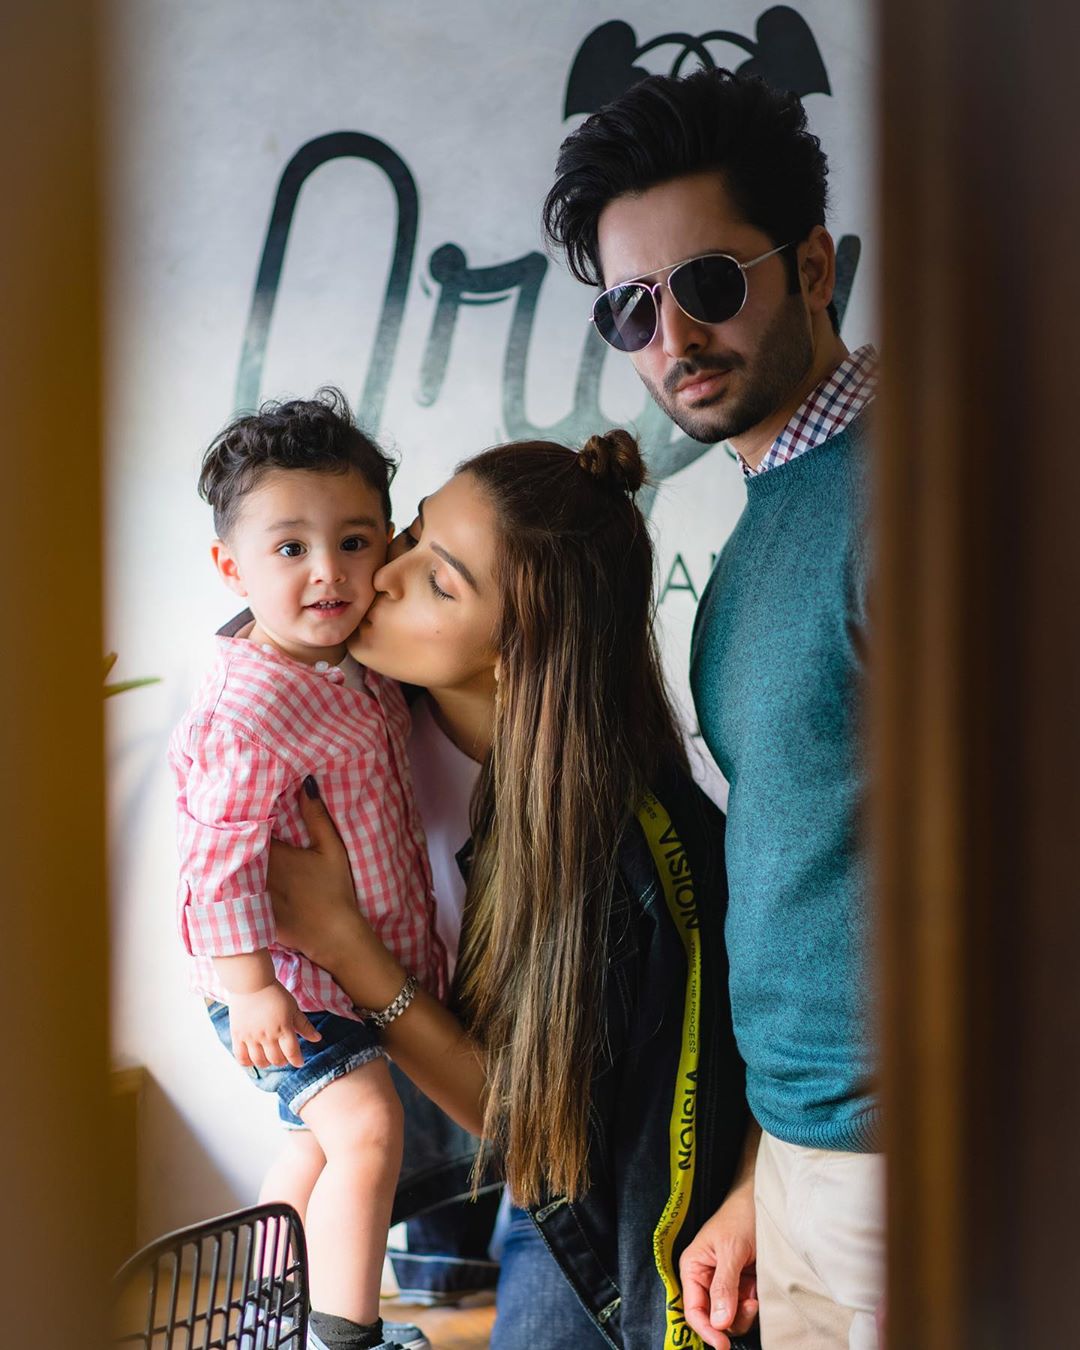 Ayeza Khan Shared Some Memories from 2019 on her Instagram